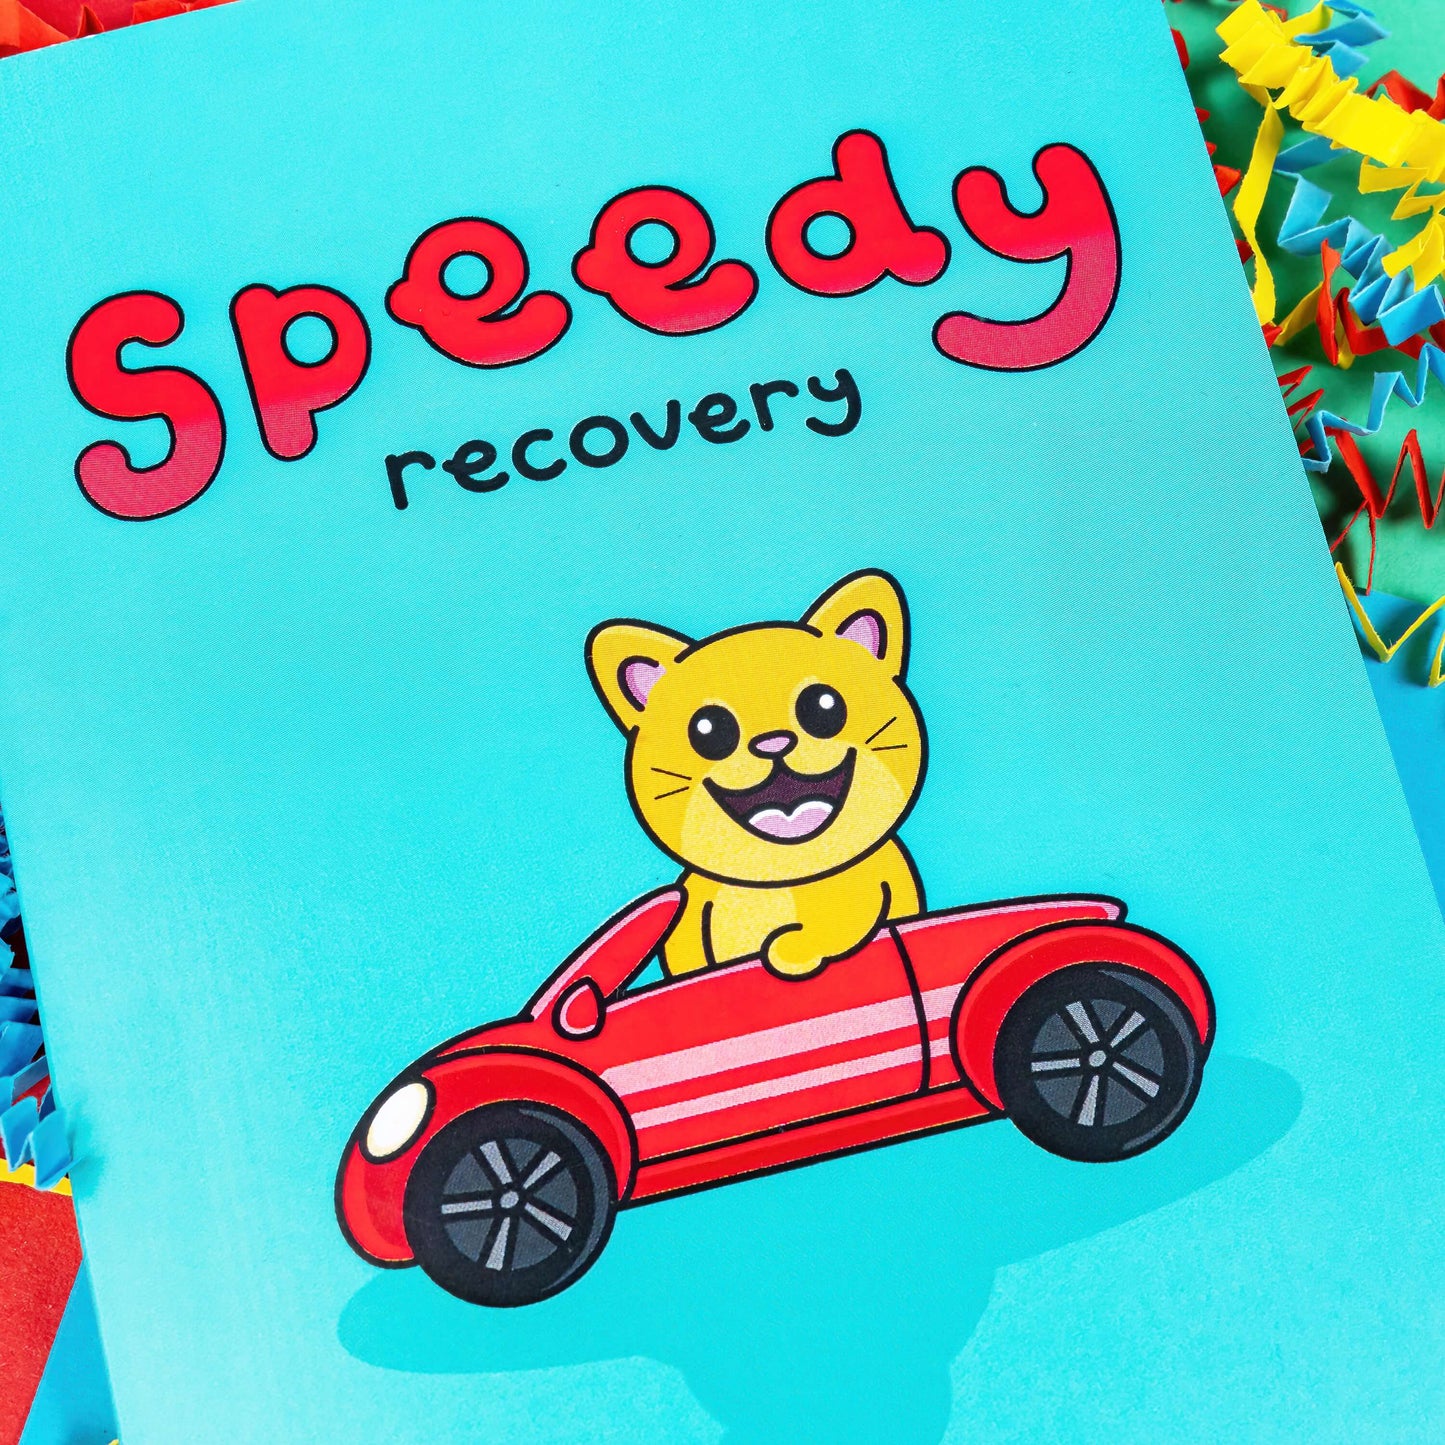 The Speedy Recovery Get Well Soon Cat Card on a colourful card confetti background. The blue card has 'speedy' written at the top in big red letters with 'recovery' written in a smaller black font underneath. In the centre of the card is an adorable orange cat with an open mouthed smile to reveal it's pink tongue. The cat has pink ears and nose and big eyes. The cat is driving a red car.